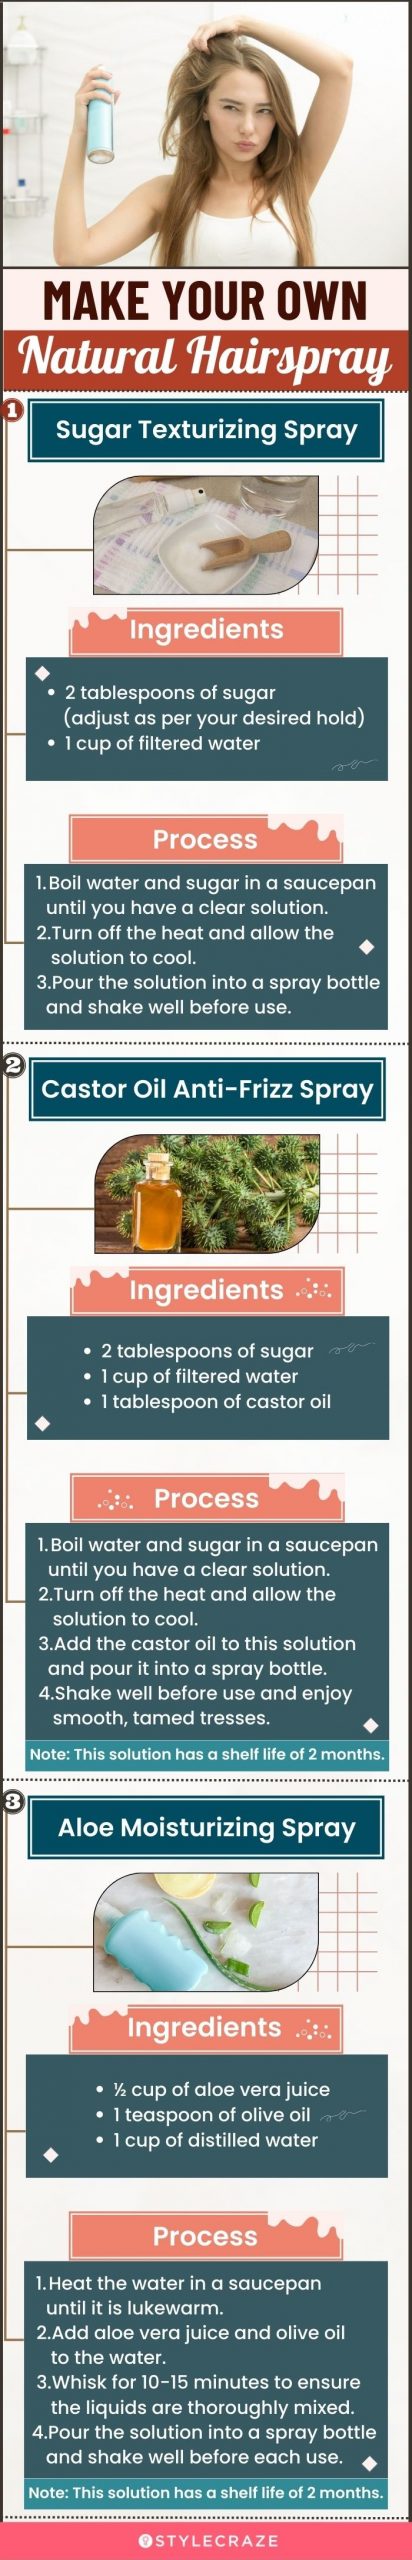 make your own natural hair spray (infographic)